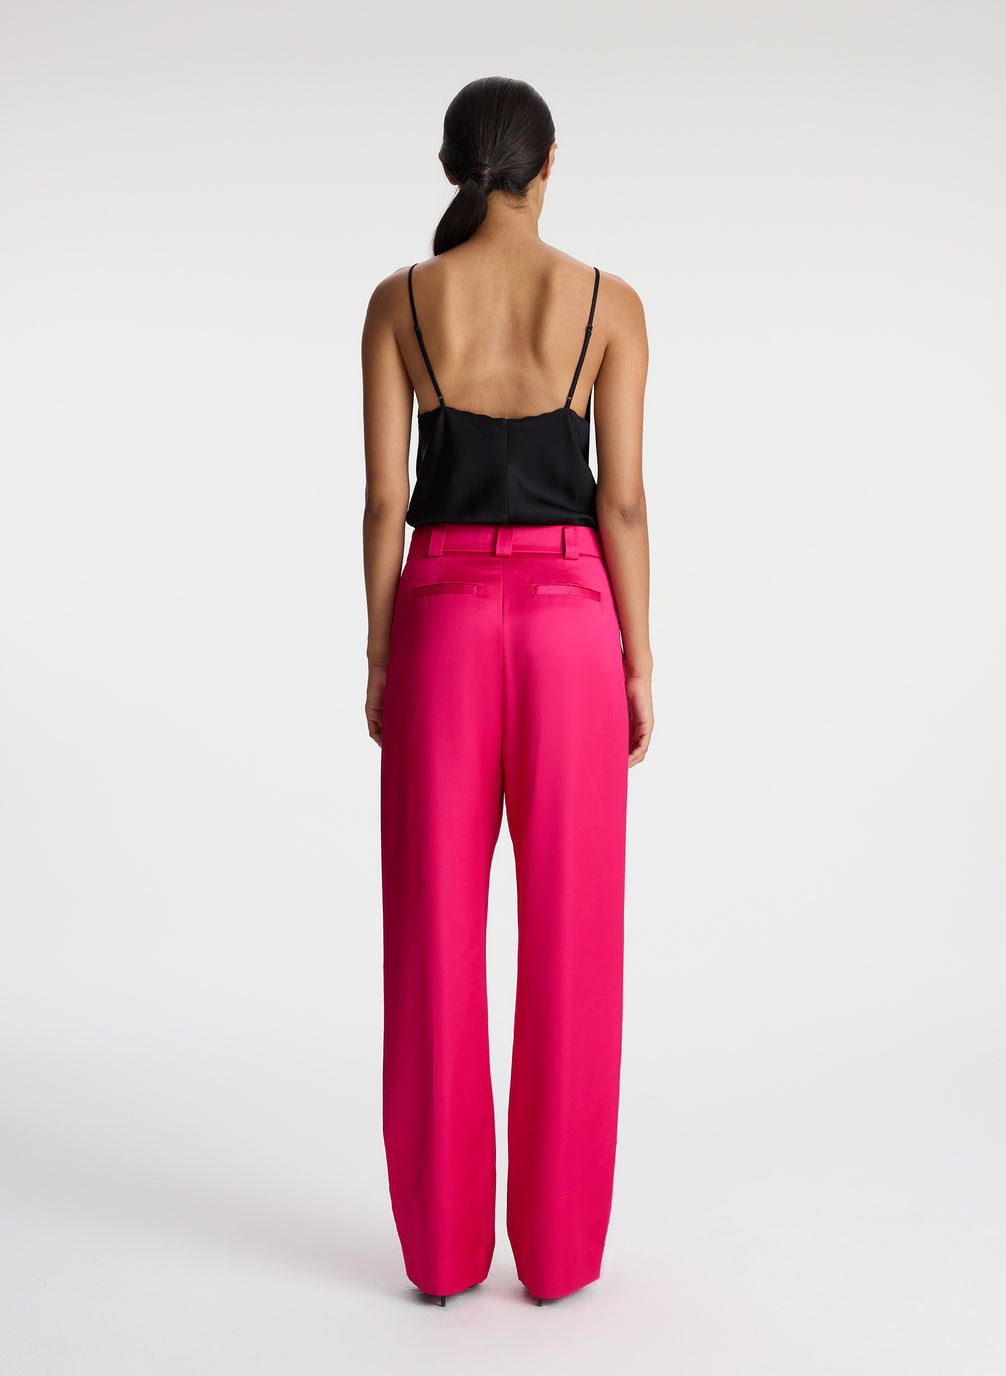 back view of woman wearing black satin camisole with bright pink satin pants